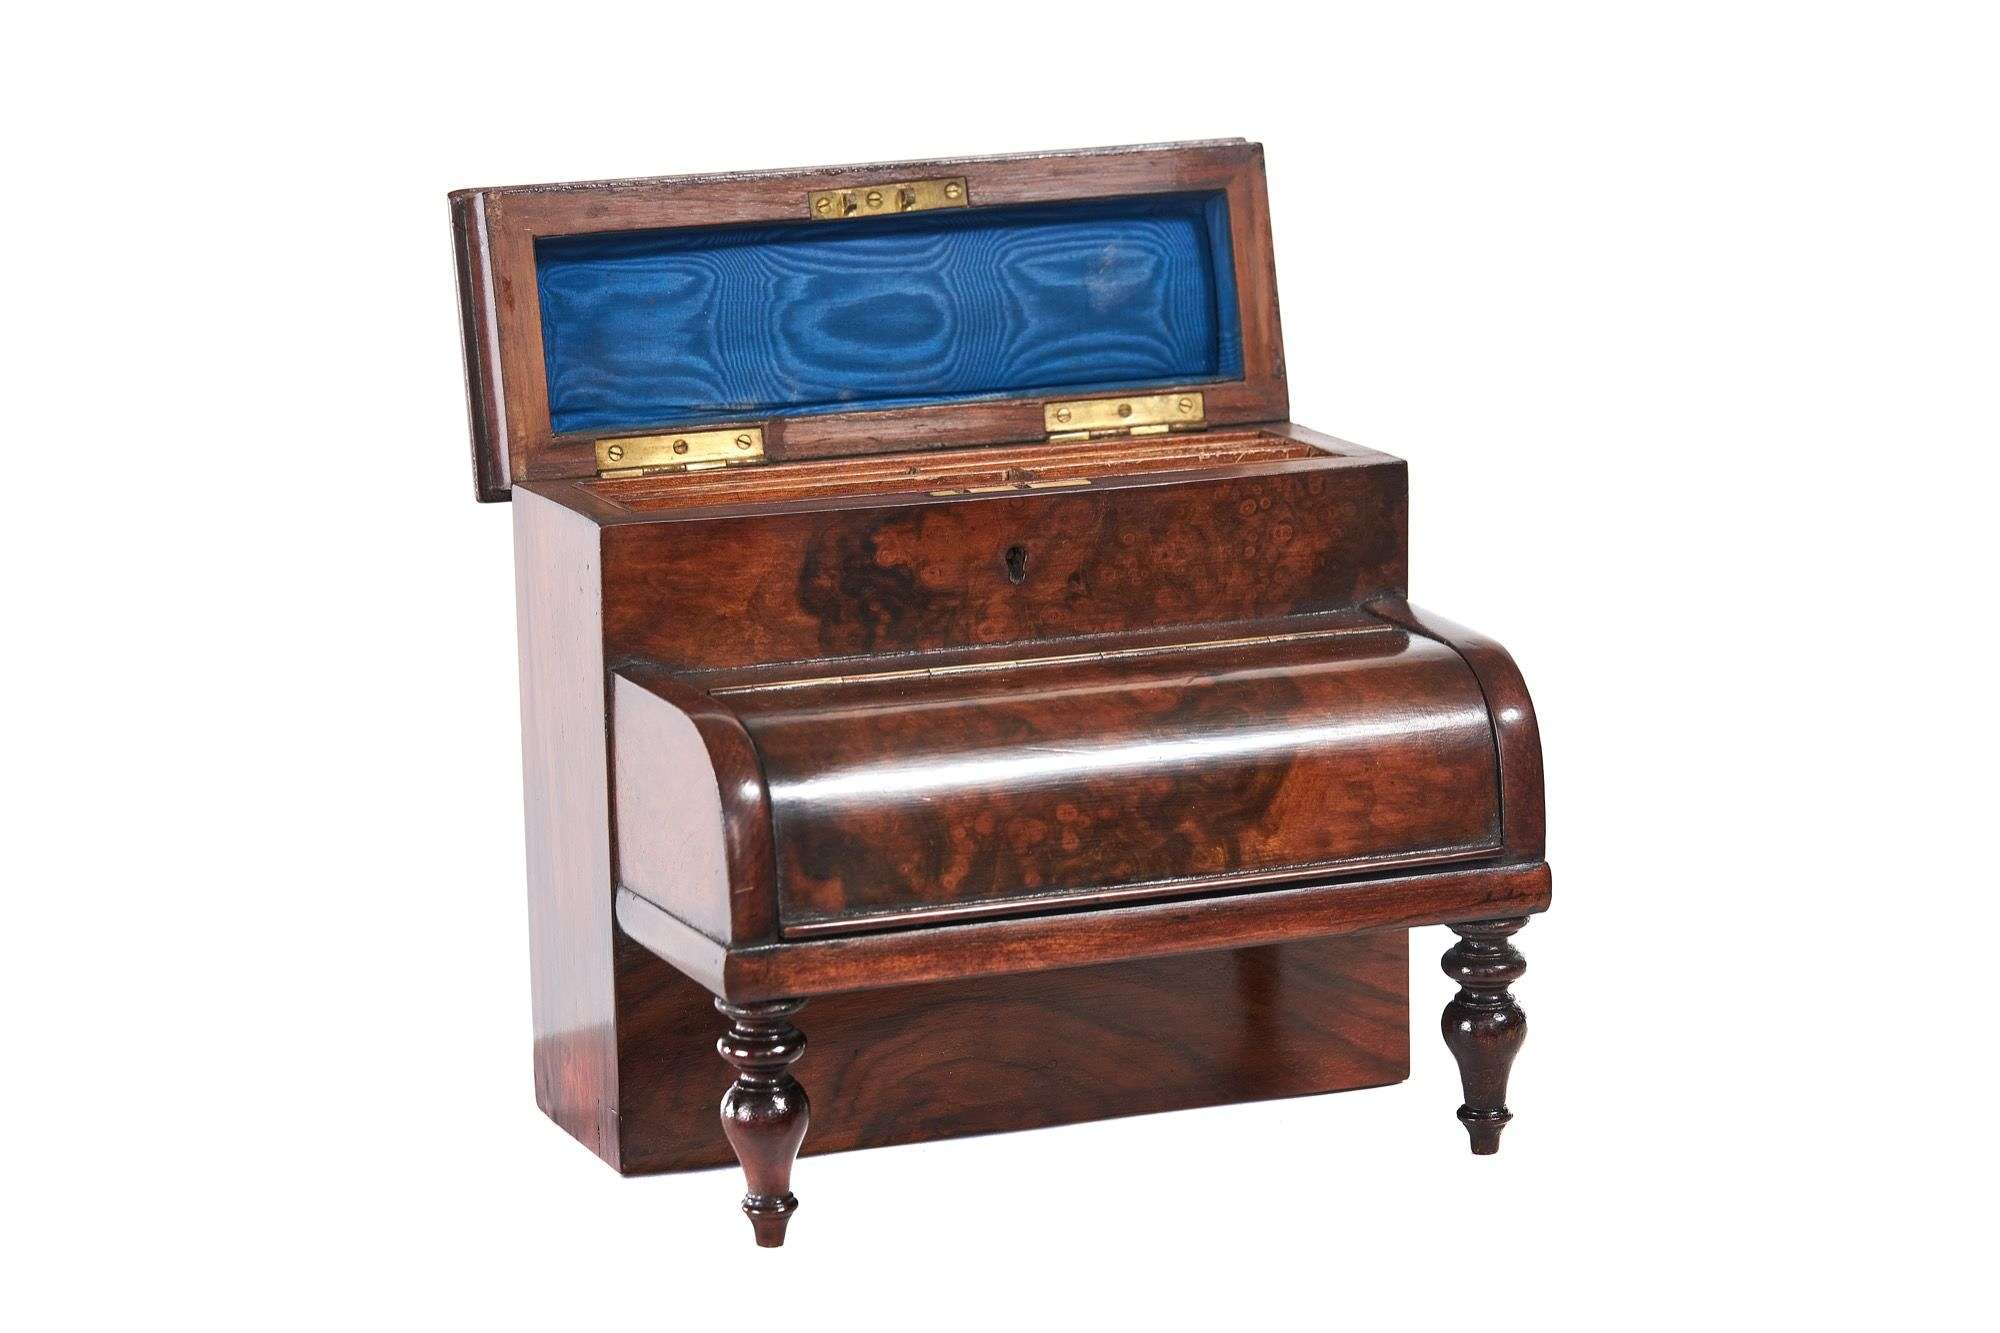 Victorian Burr walnut desk stand in the form of upright piano